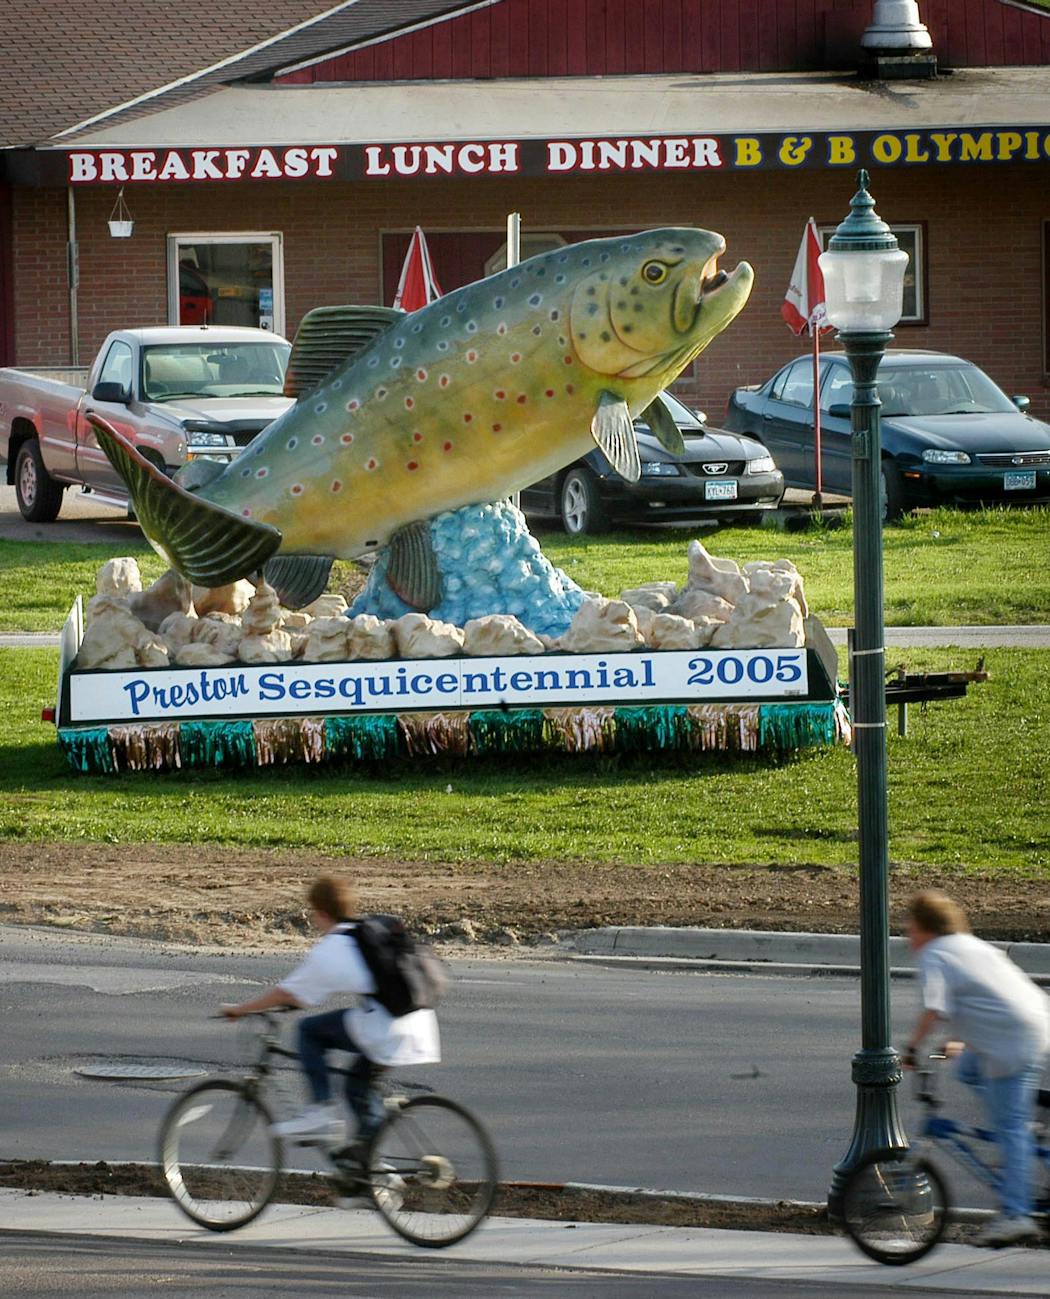  Visitors to Preston are greeted by a huge trout float in the center of town.